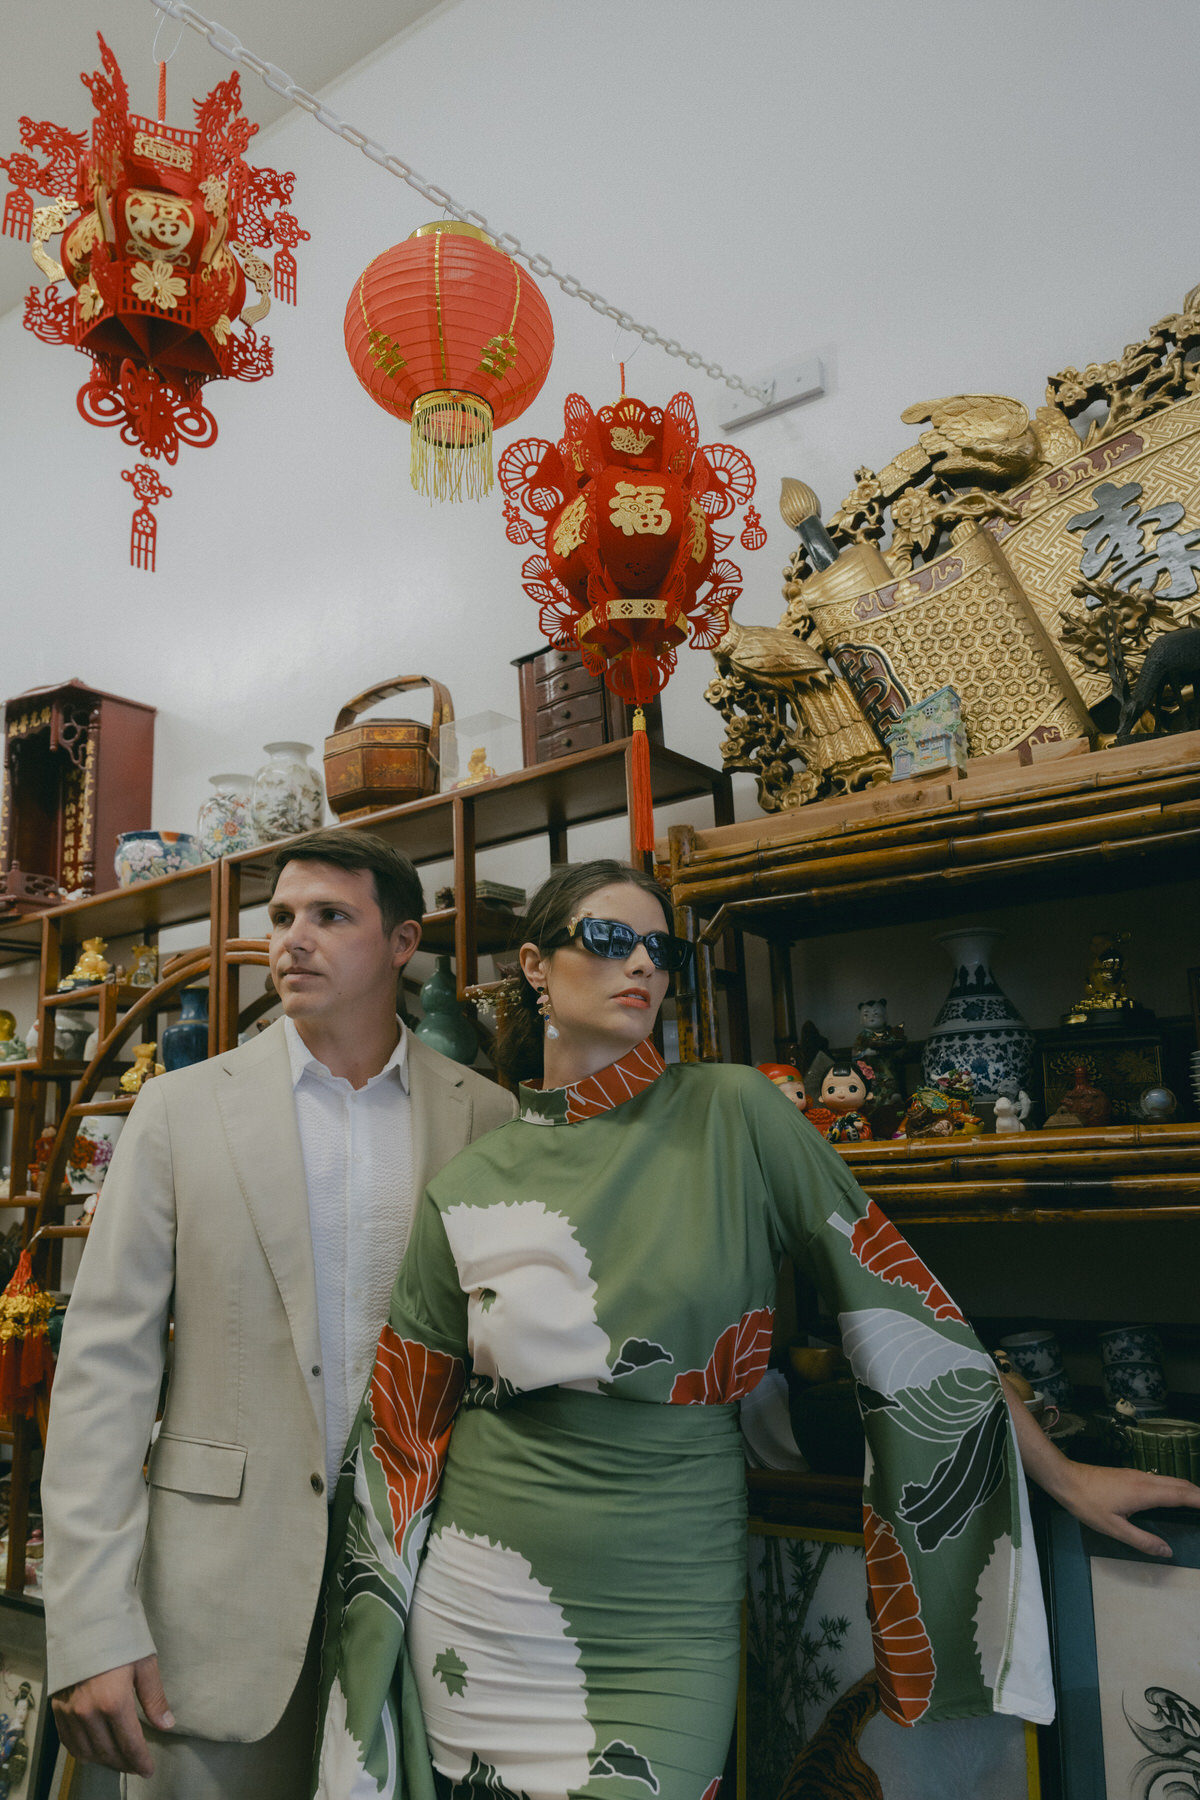 A couple opts for an Asian-inspired look for their engagement session photos.